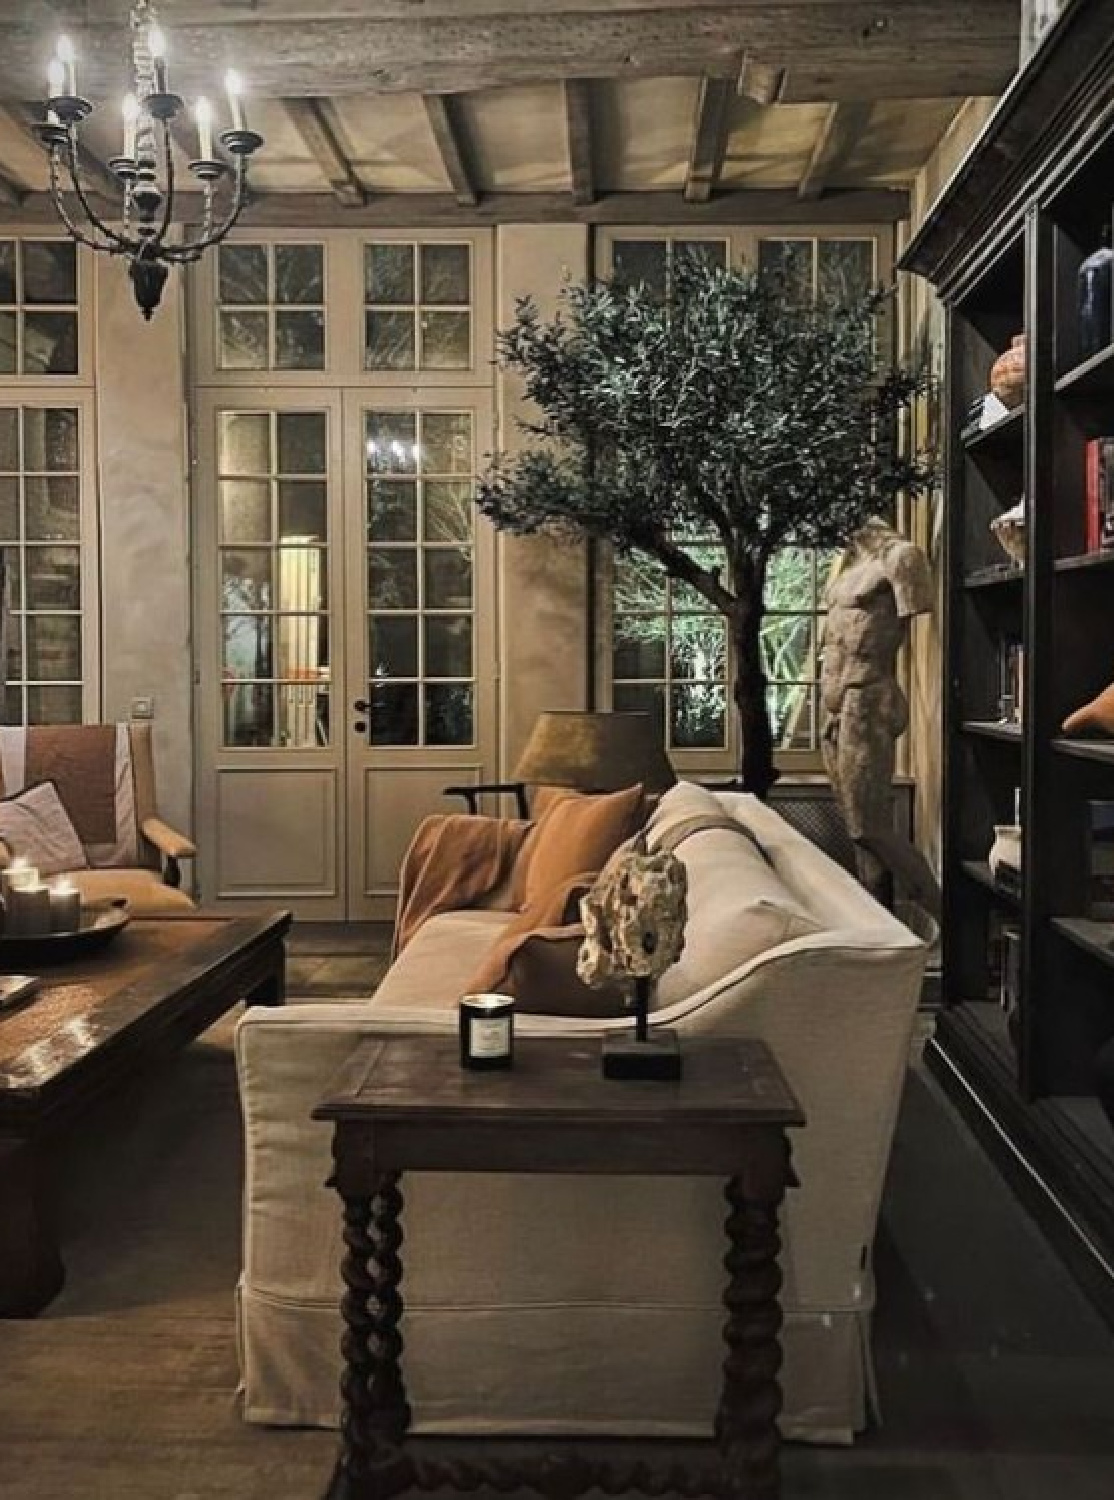 @thenotarybe - Belgian linen slope arm sofa and vuilt-in shelves in a cozy living orangery. #belgianinteriors